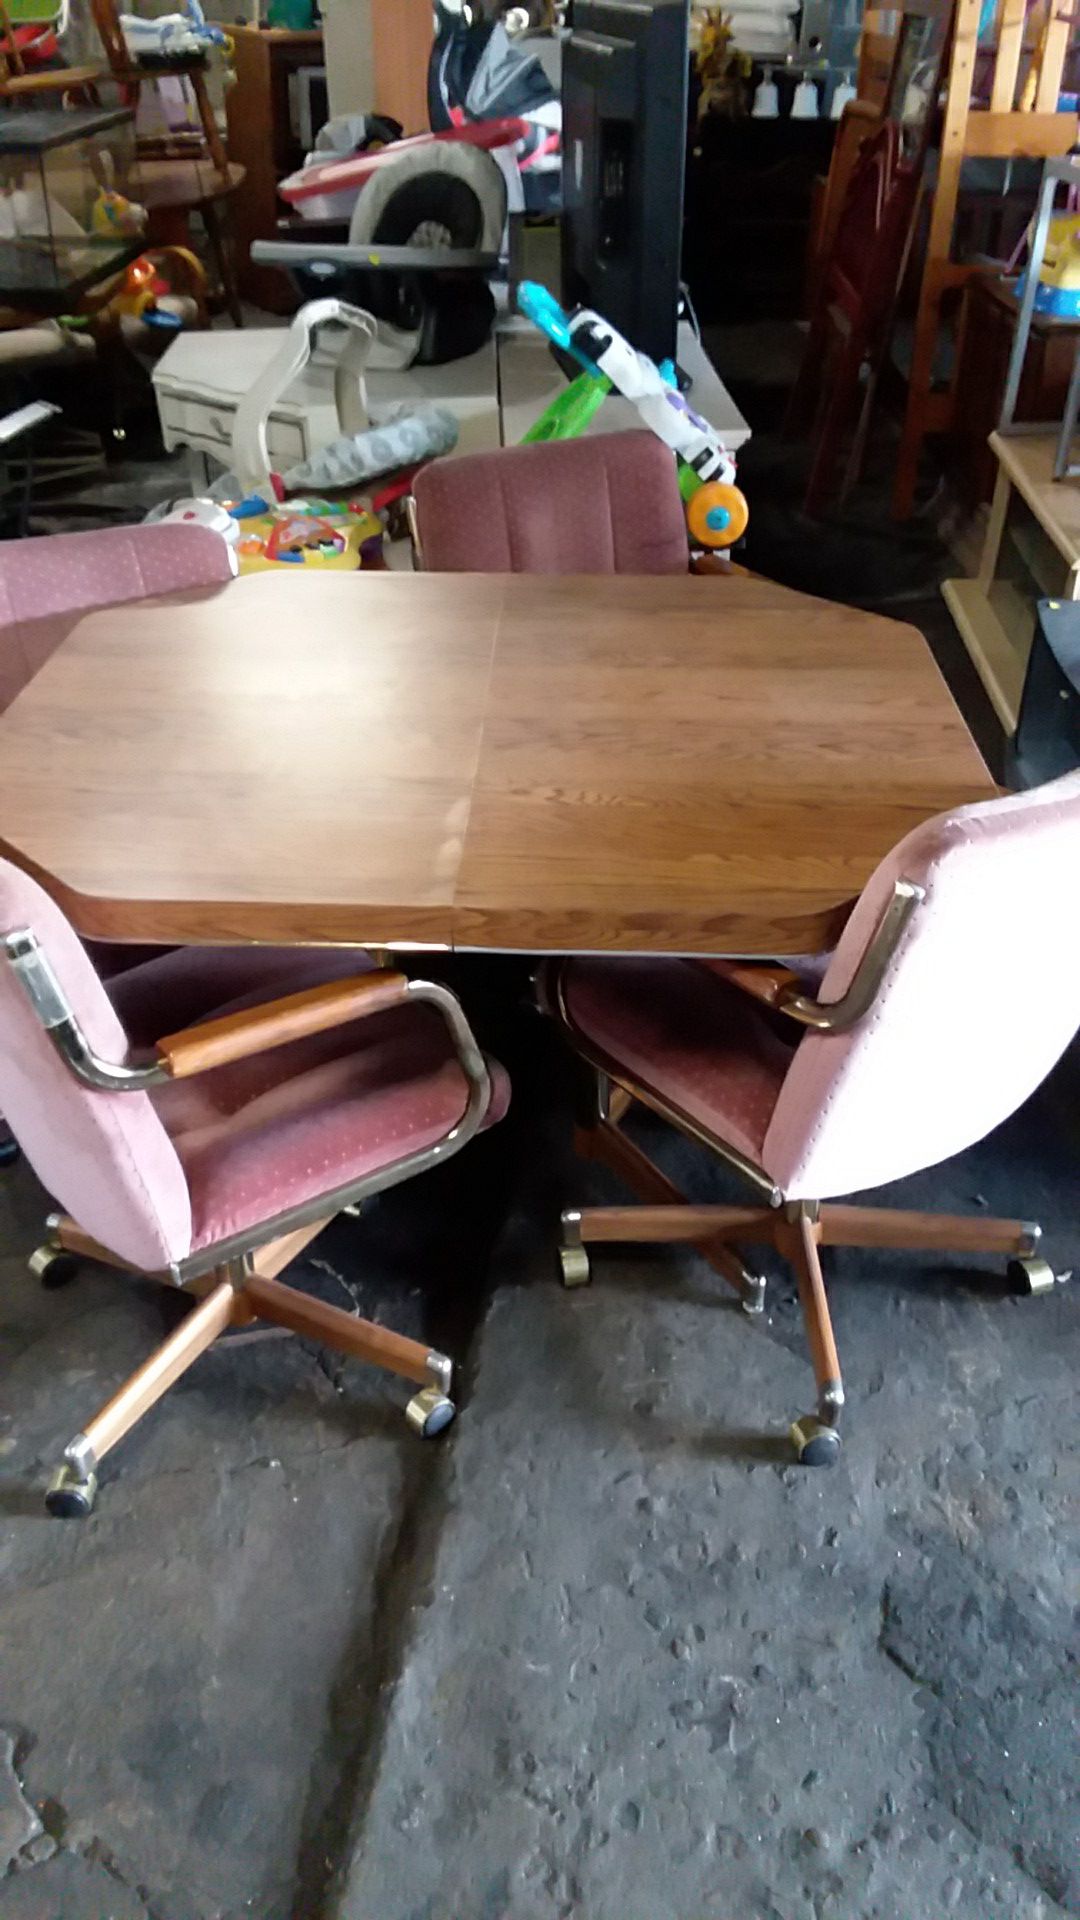 Used 5 piece dining table